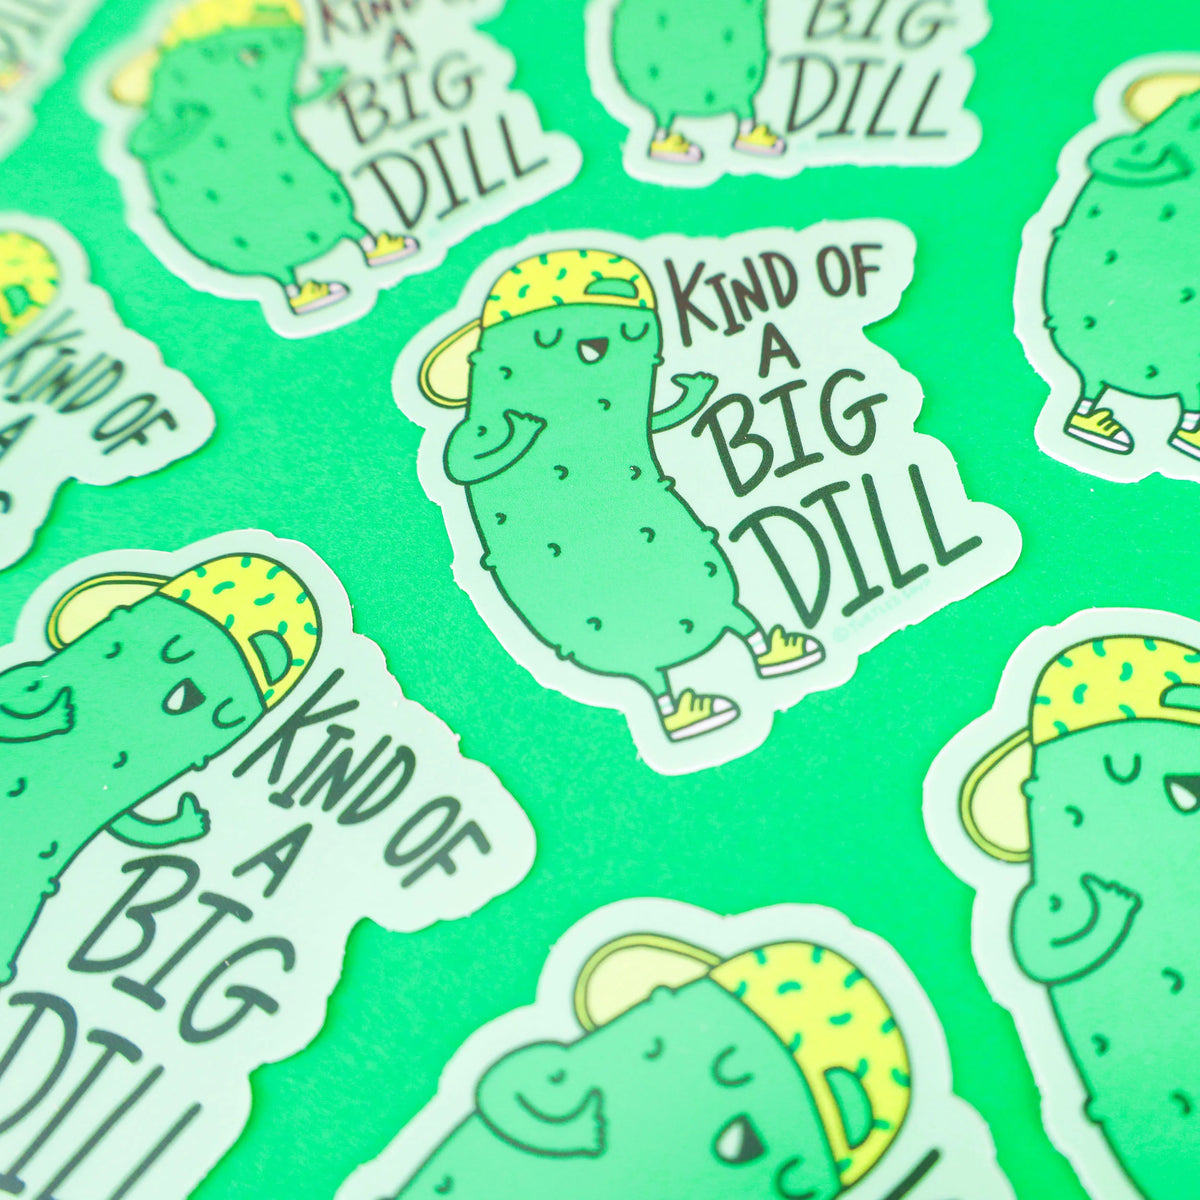 Kind Of A Big Dill Vinyl Sticker Cover